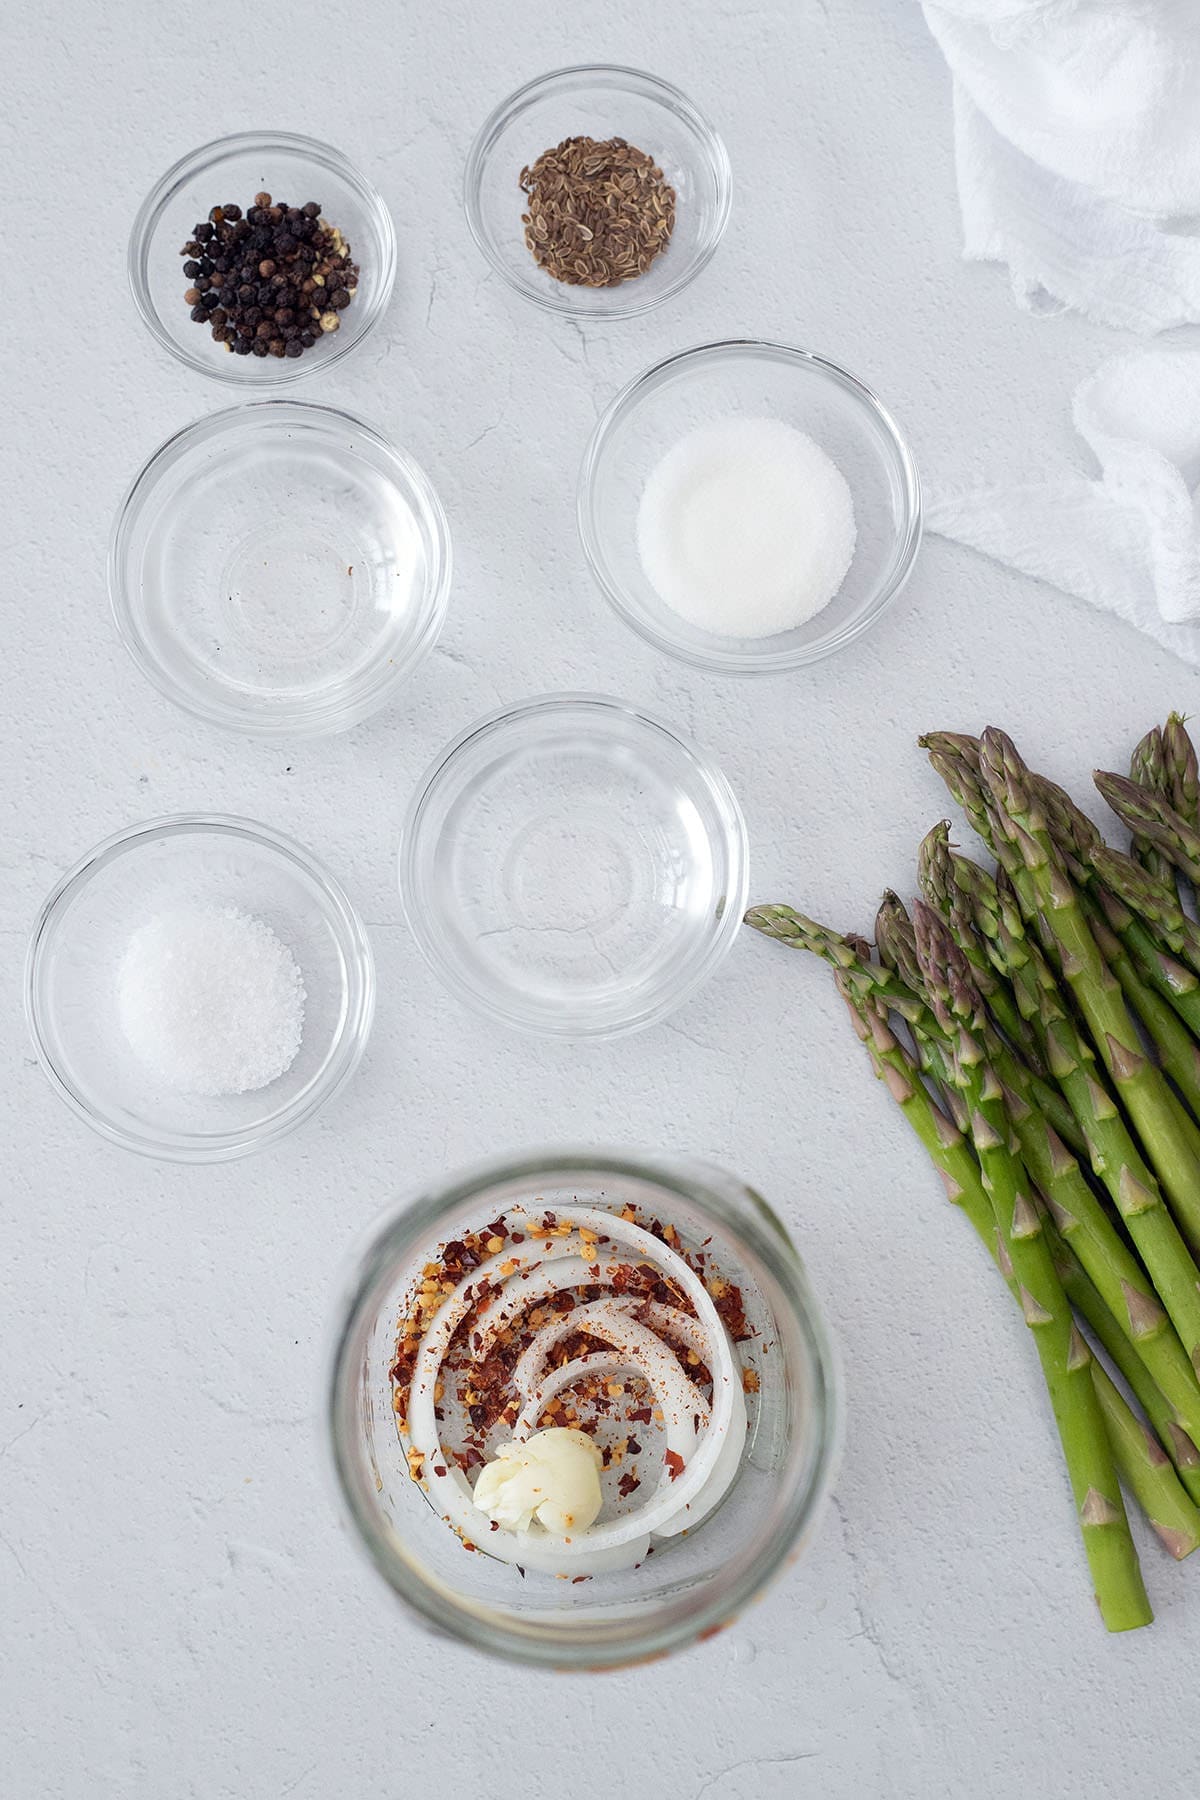 Glass bowls with spices next to stalks of asparagus.